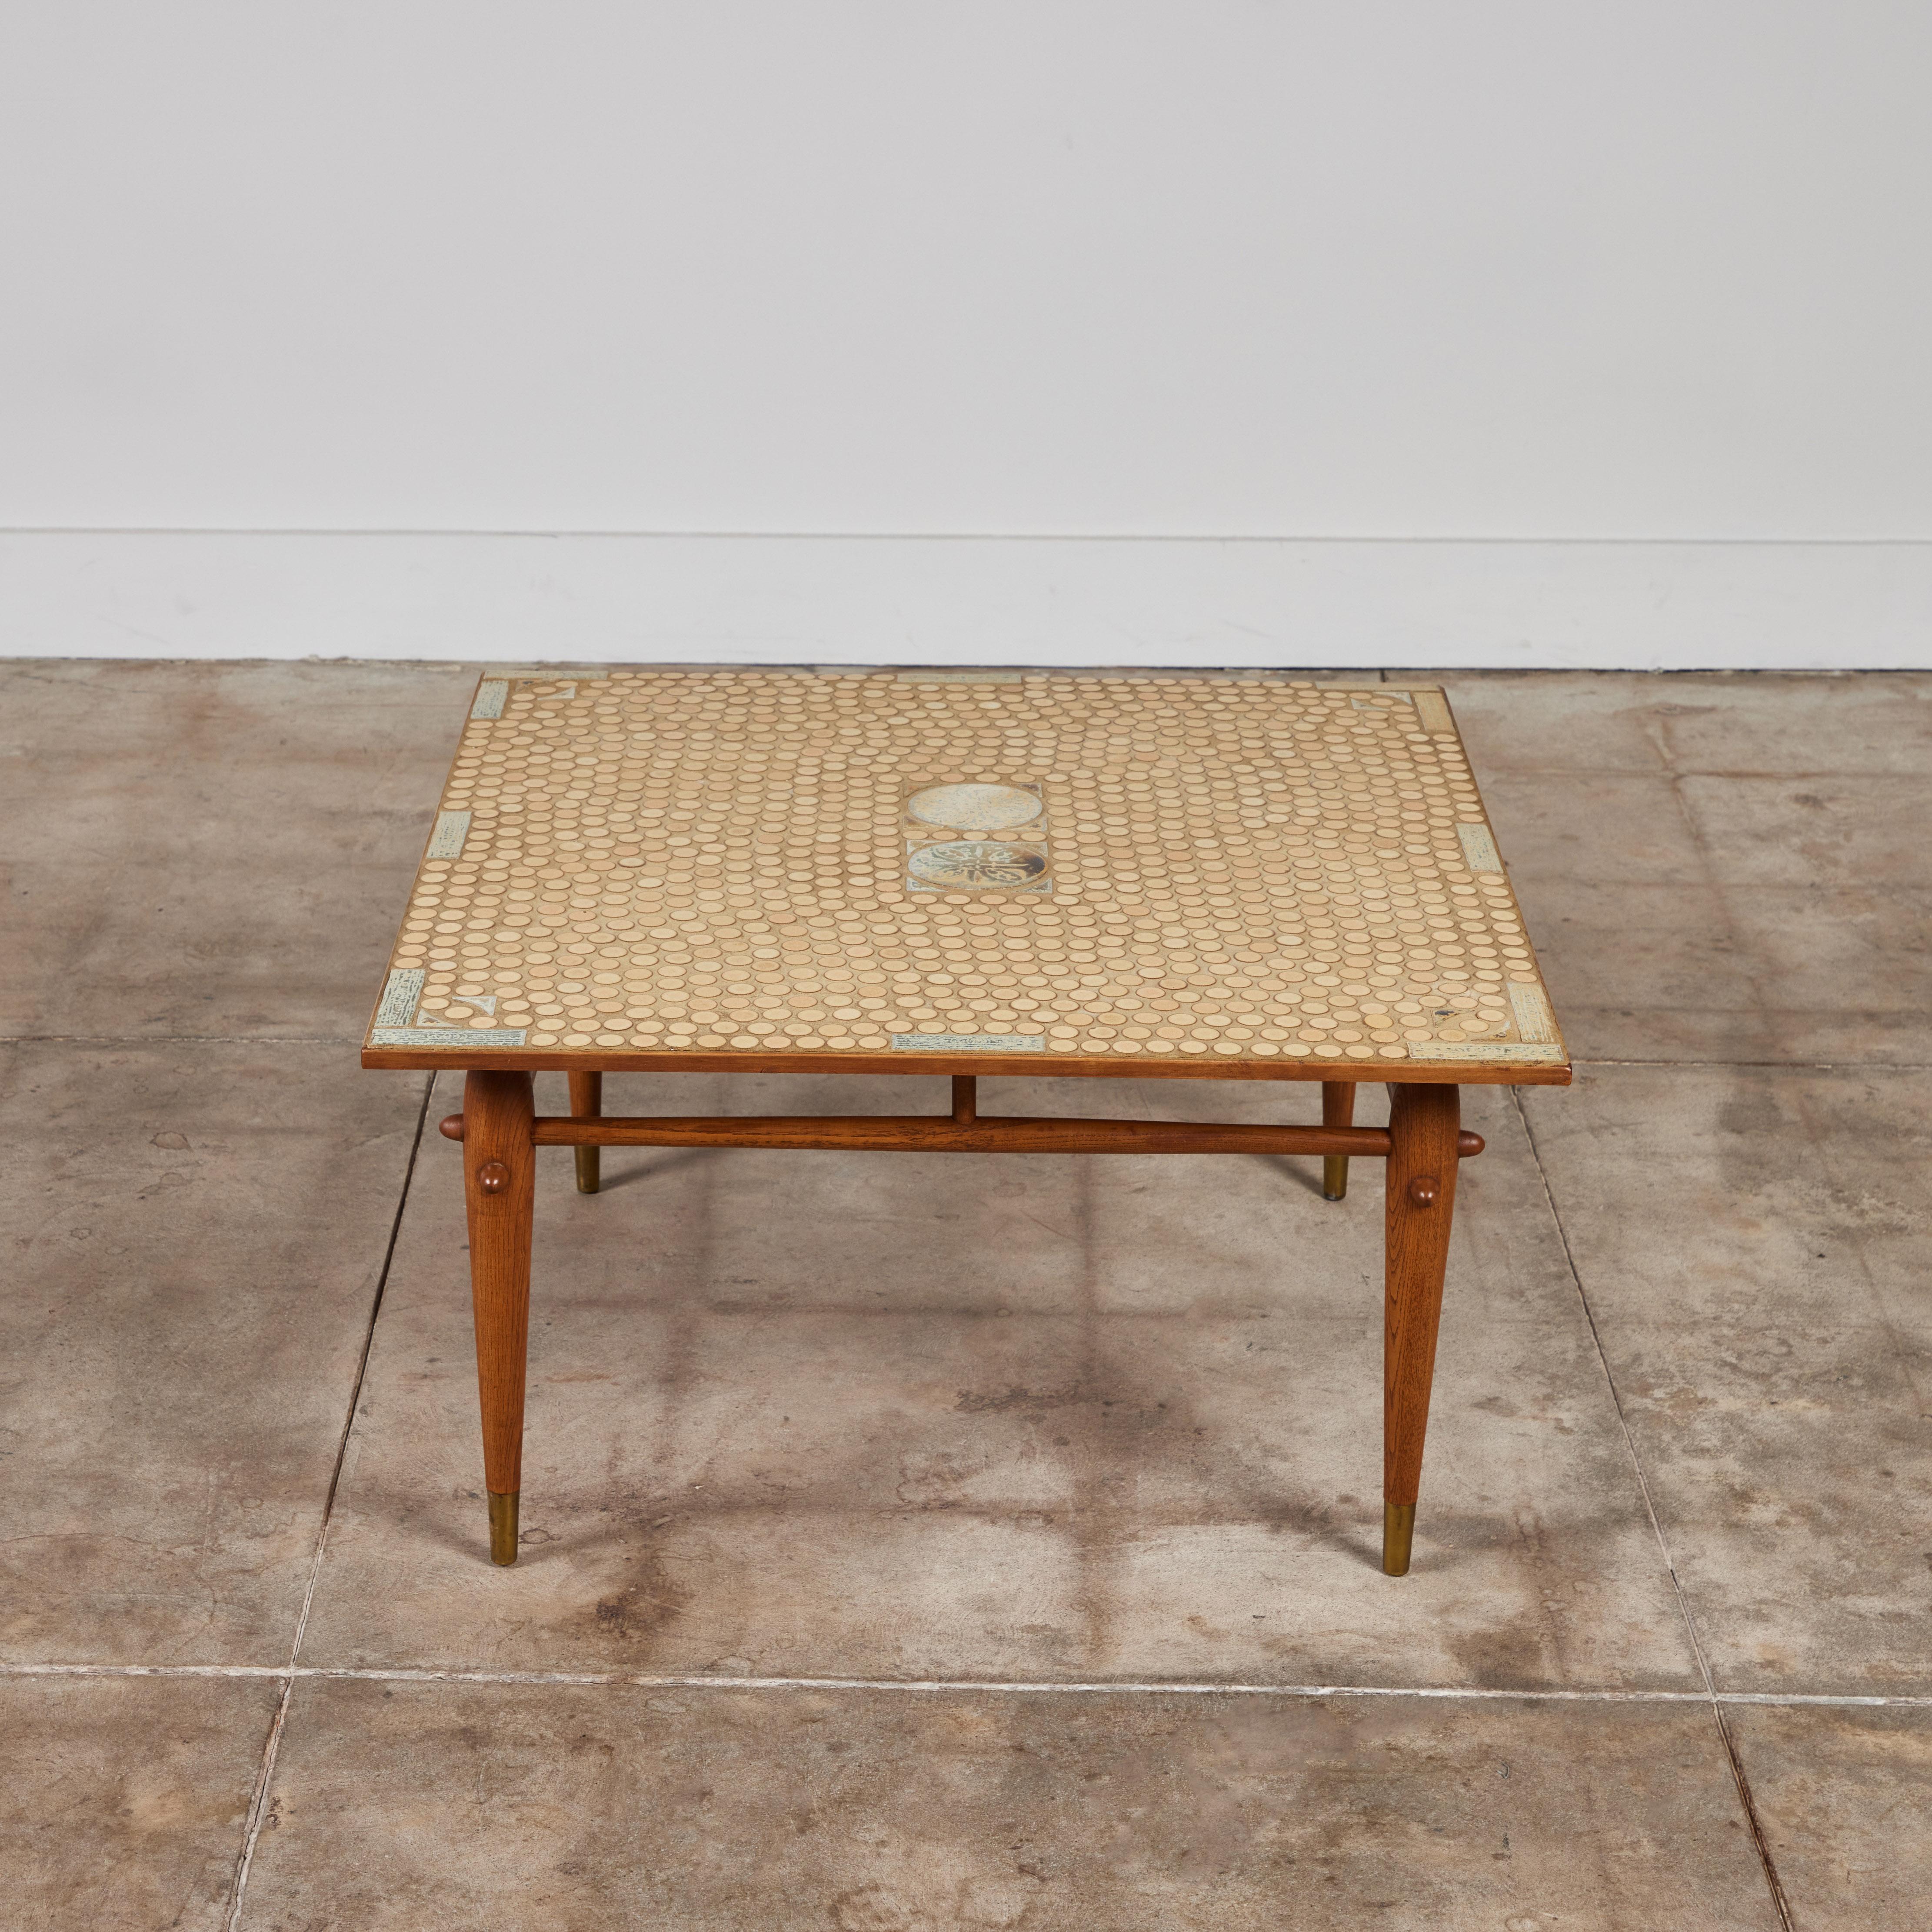 20th Century Hand Laid Mosaic Tile Coffee Table in the Style of Tue Poulsen